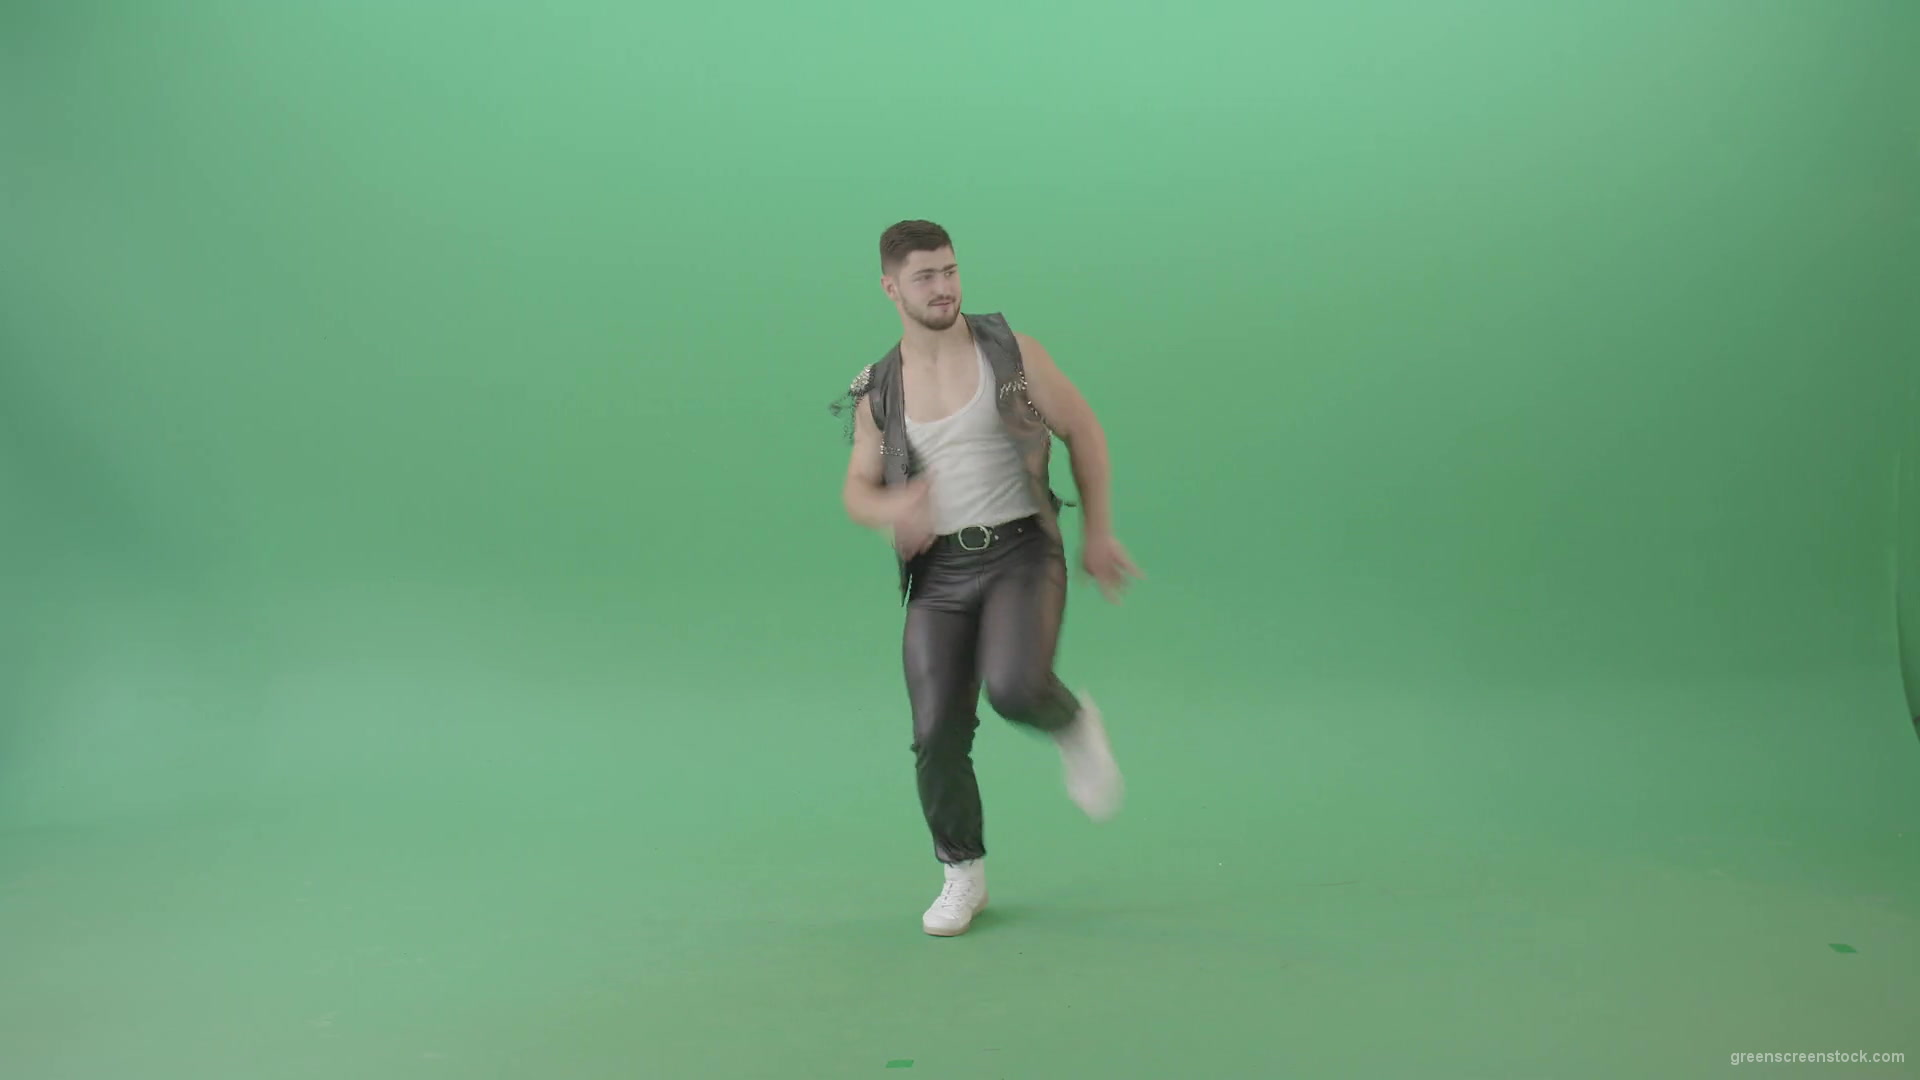 Angry-caucasian-Man-in-Black-leather-costume-dancing-Pop-Moves-on-Green-Screen-4K-Video-Footage-1920_009 Green Screen Stock